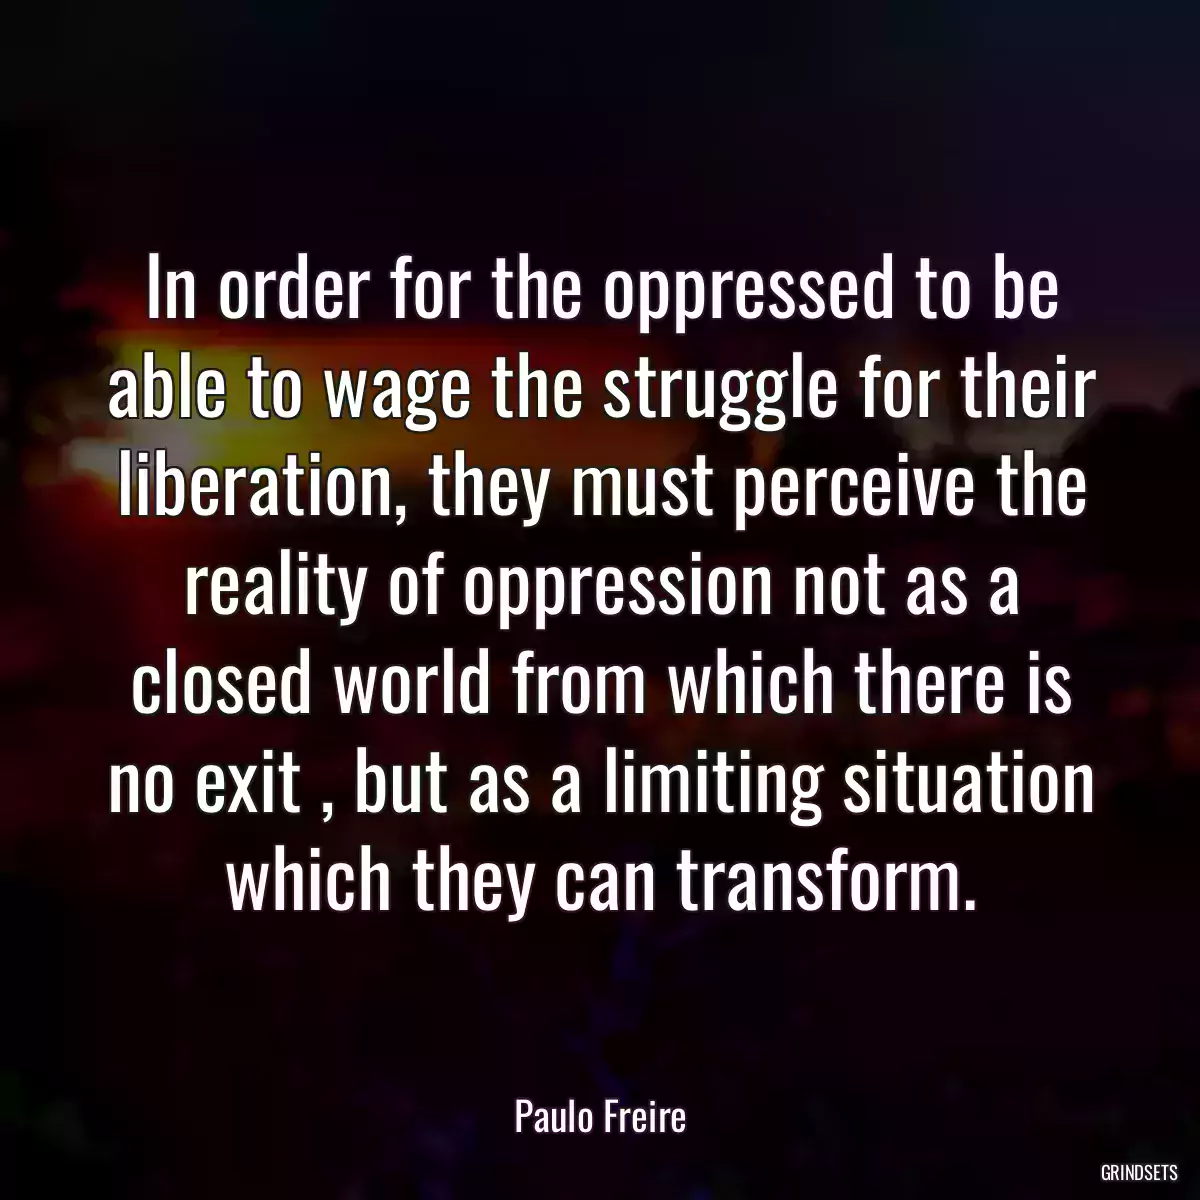 In order for the oppressed to be able to wage the struggle for their liberation, they must perceive the reality of oppression not as a closed world from which there is no exit , but as a limiting situation which they can transform.